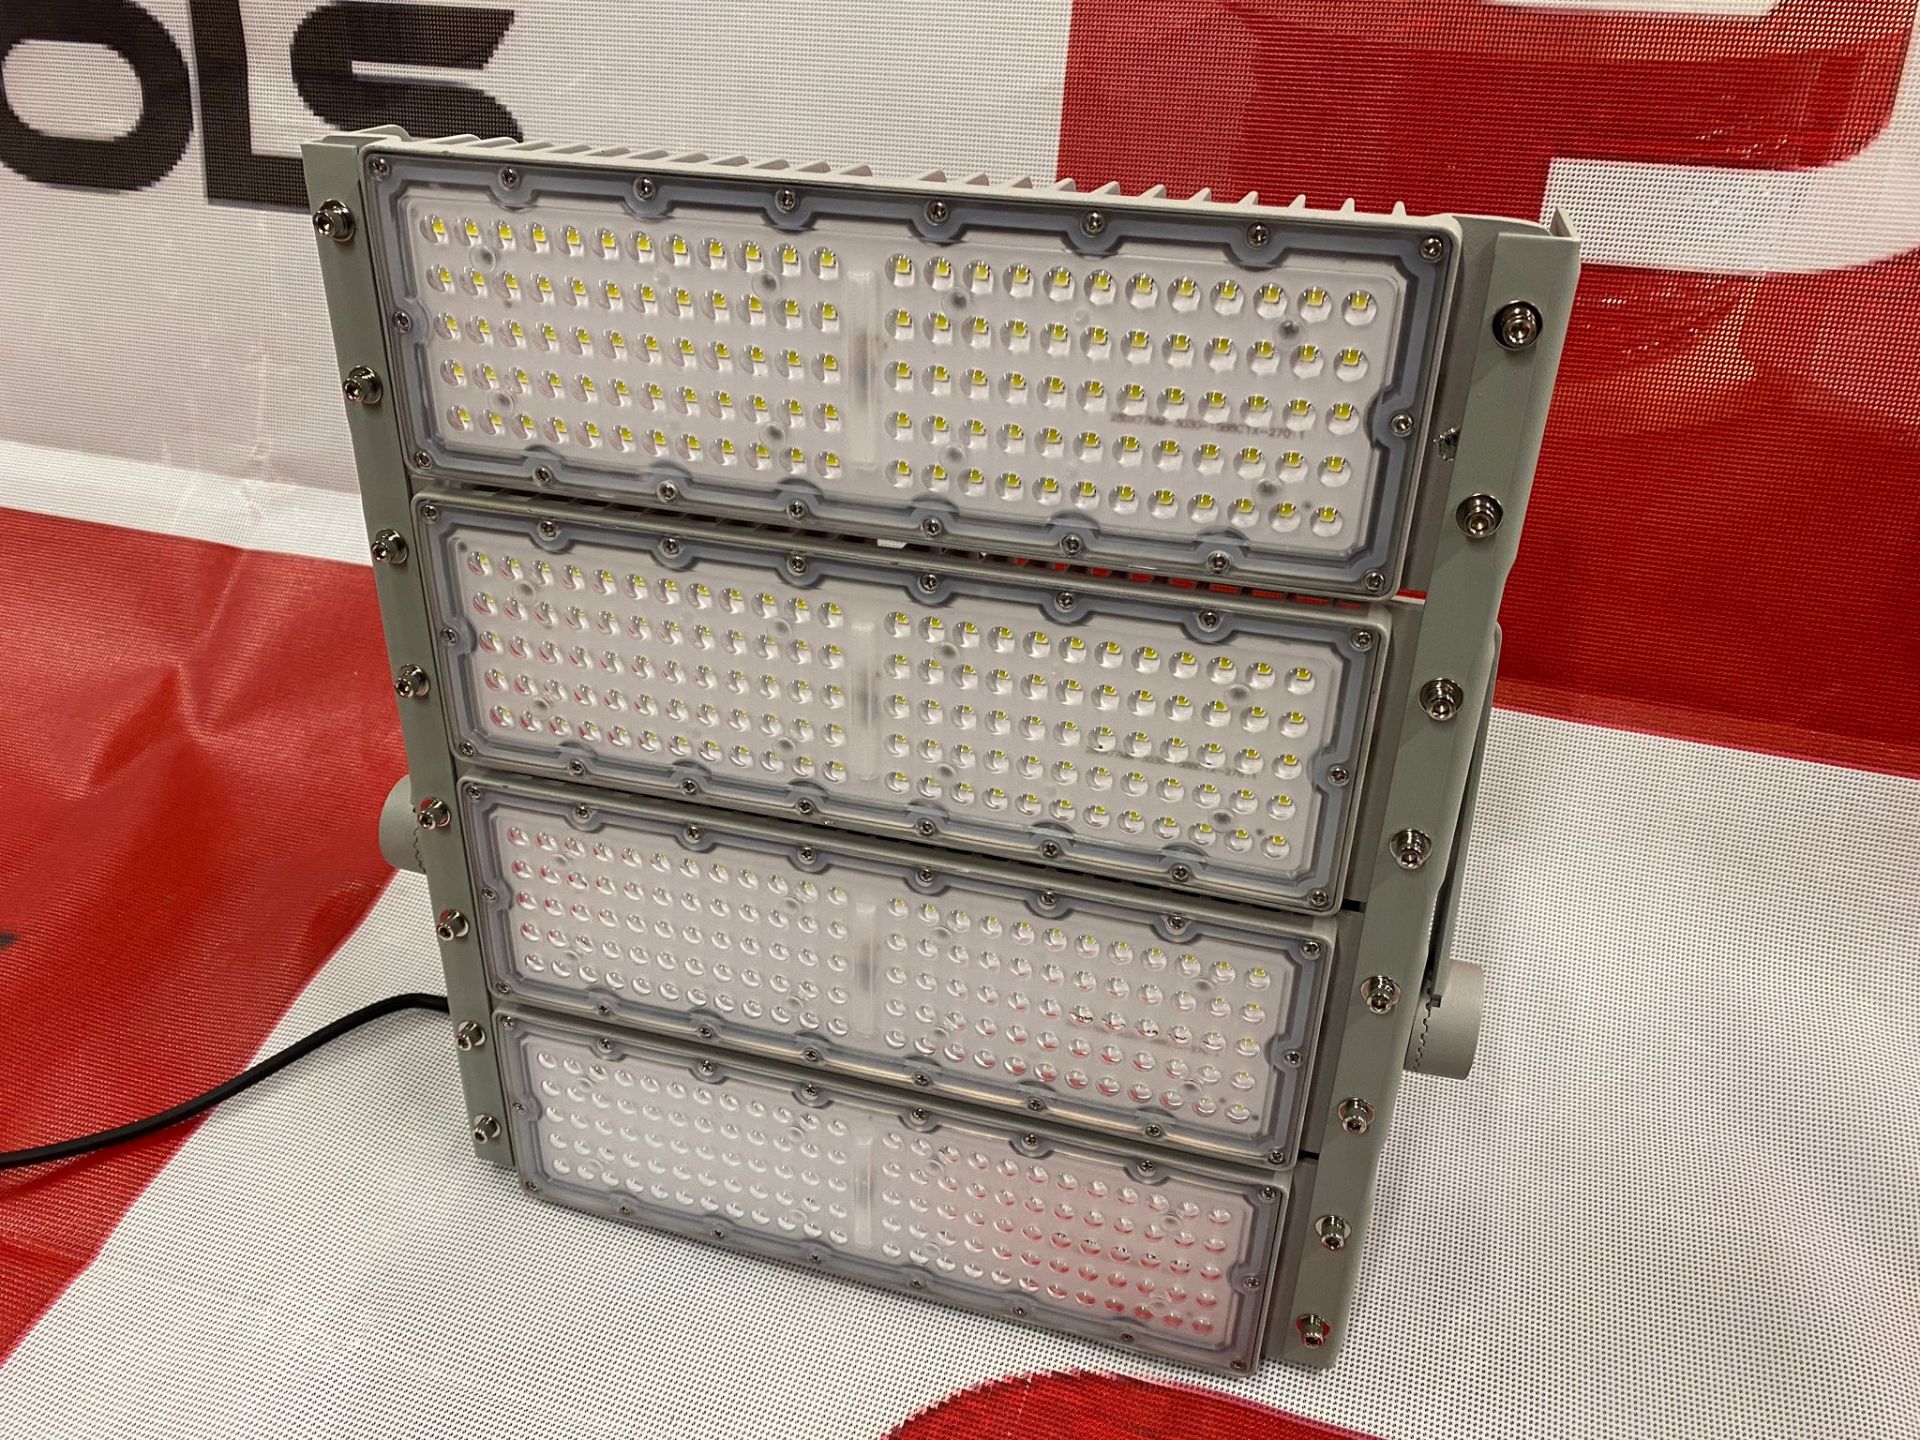 1 x LED400 Watt Flood Light Panel - For Car Parks, Security, Playing fields, Football pitches etc